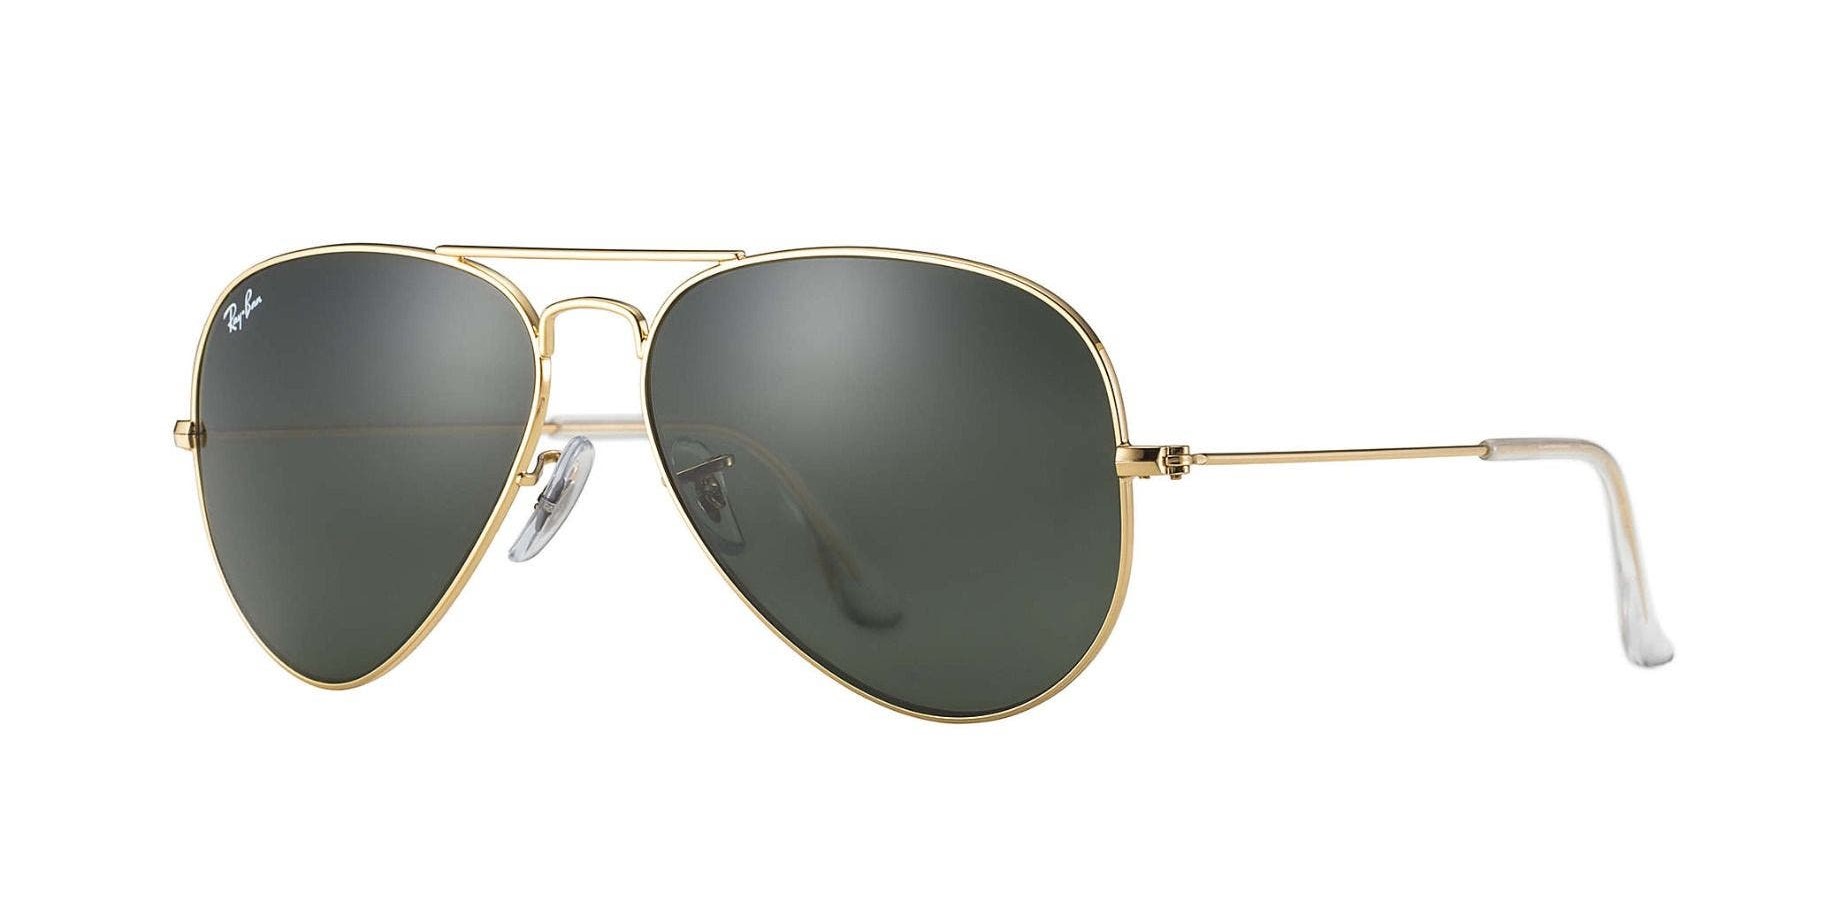 Ray-Ban RB3025 Aviator Sunglassese Gold Metal Frame with Crystal Green G-15 Lenses and Clear Temple Tips